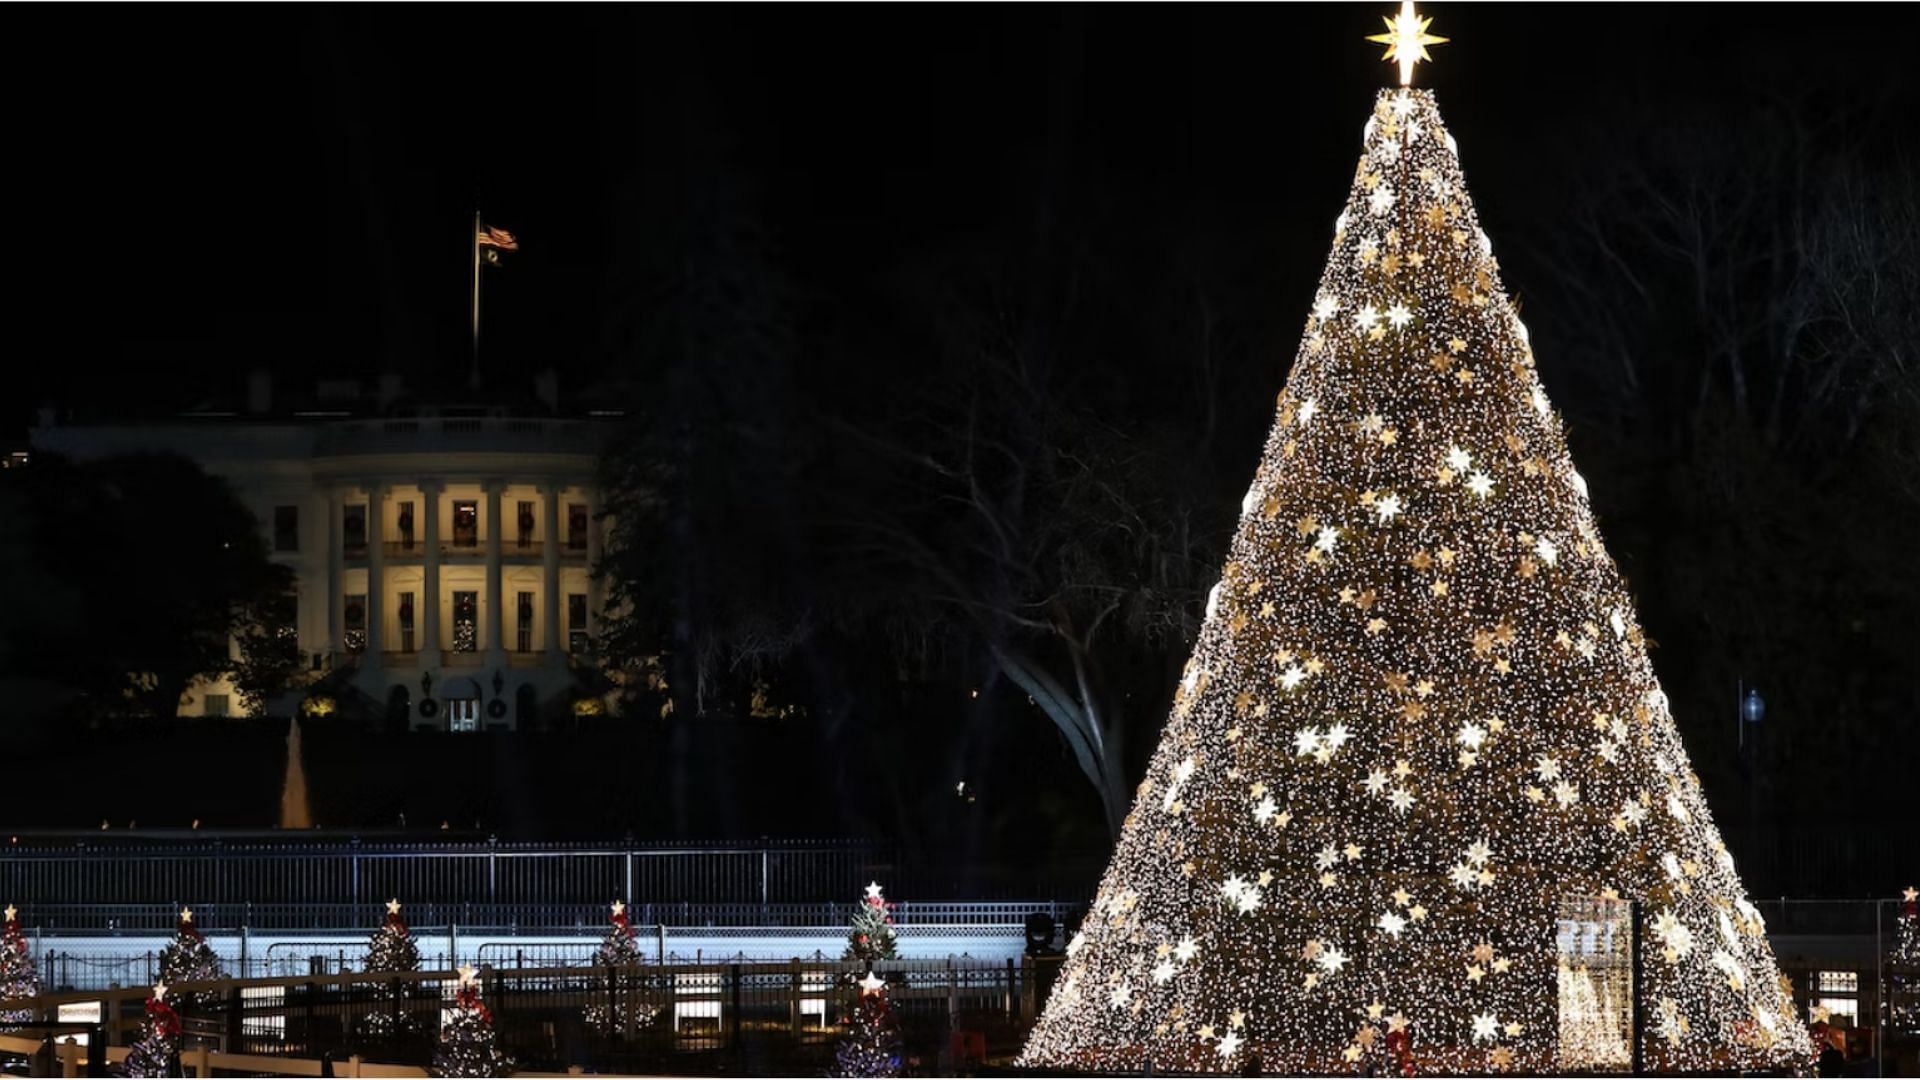 National Christmas Tree Lighting Celebrating 100 Years air time and